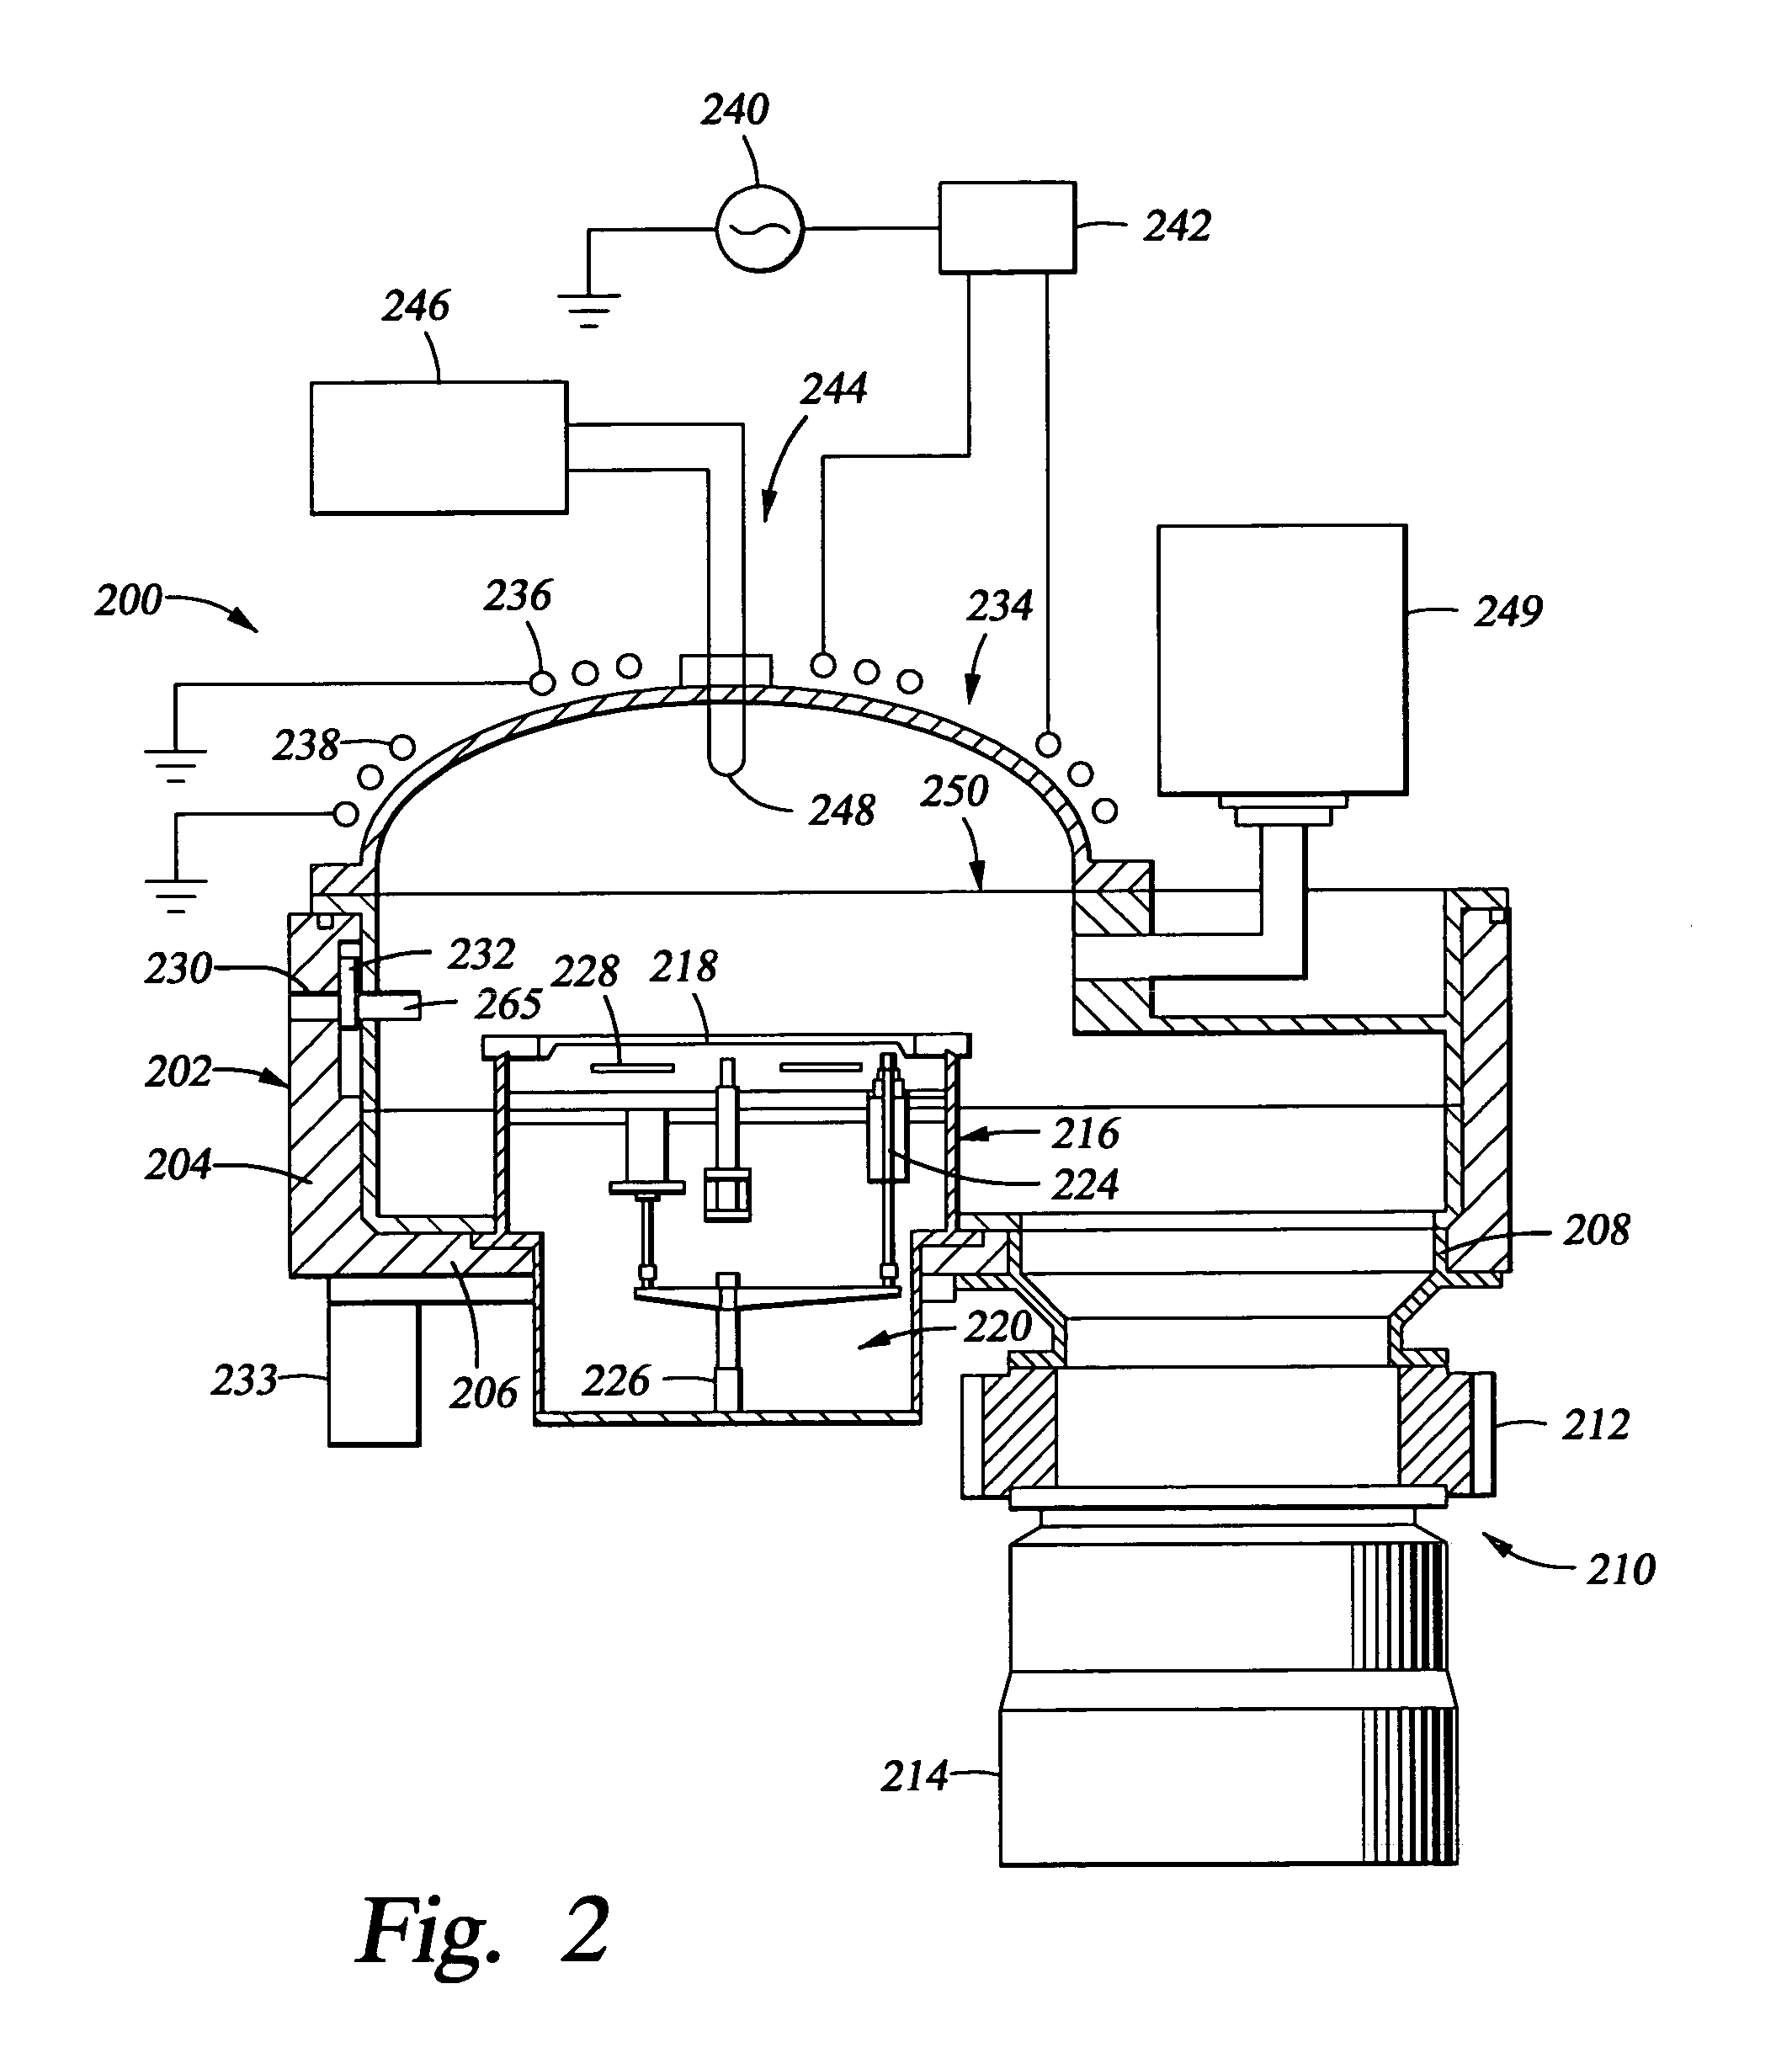 Multi-purpose processing chamber with removable chamber liner